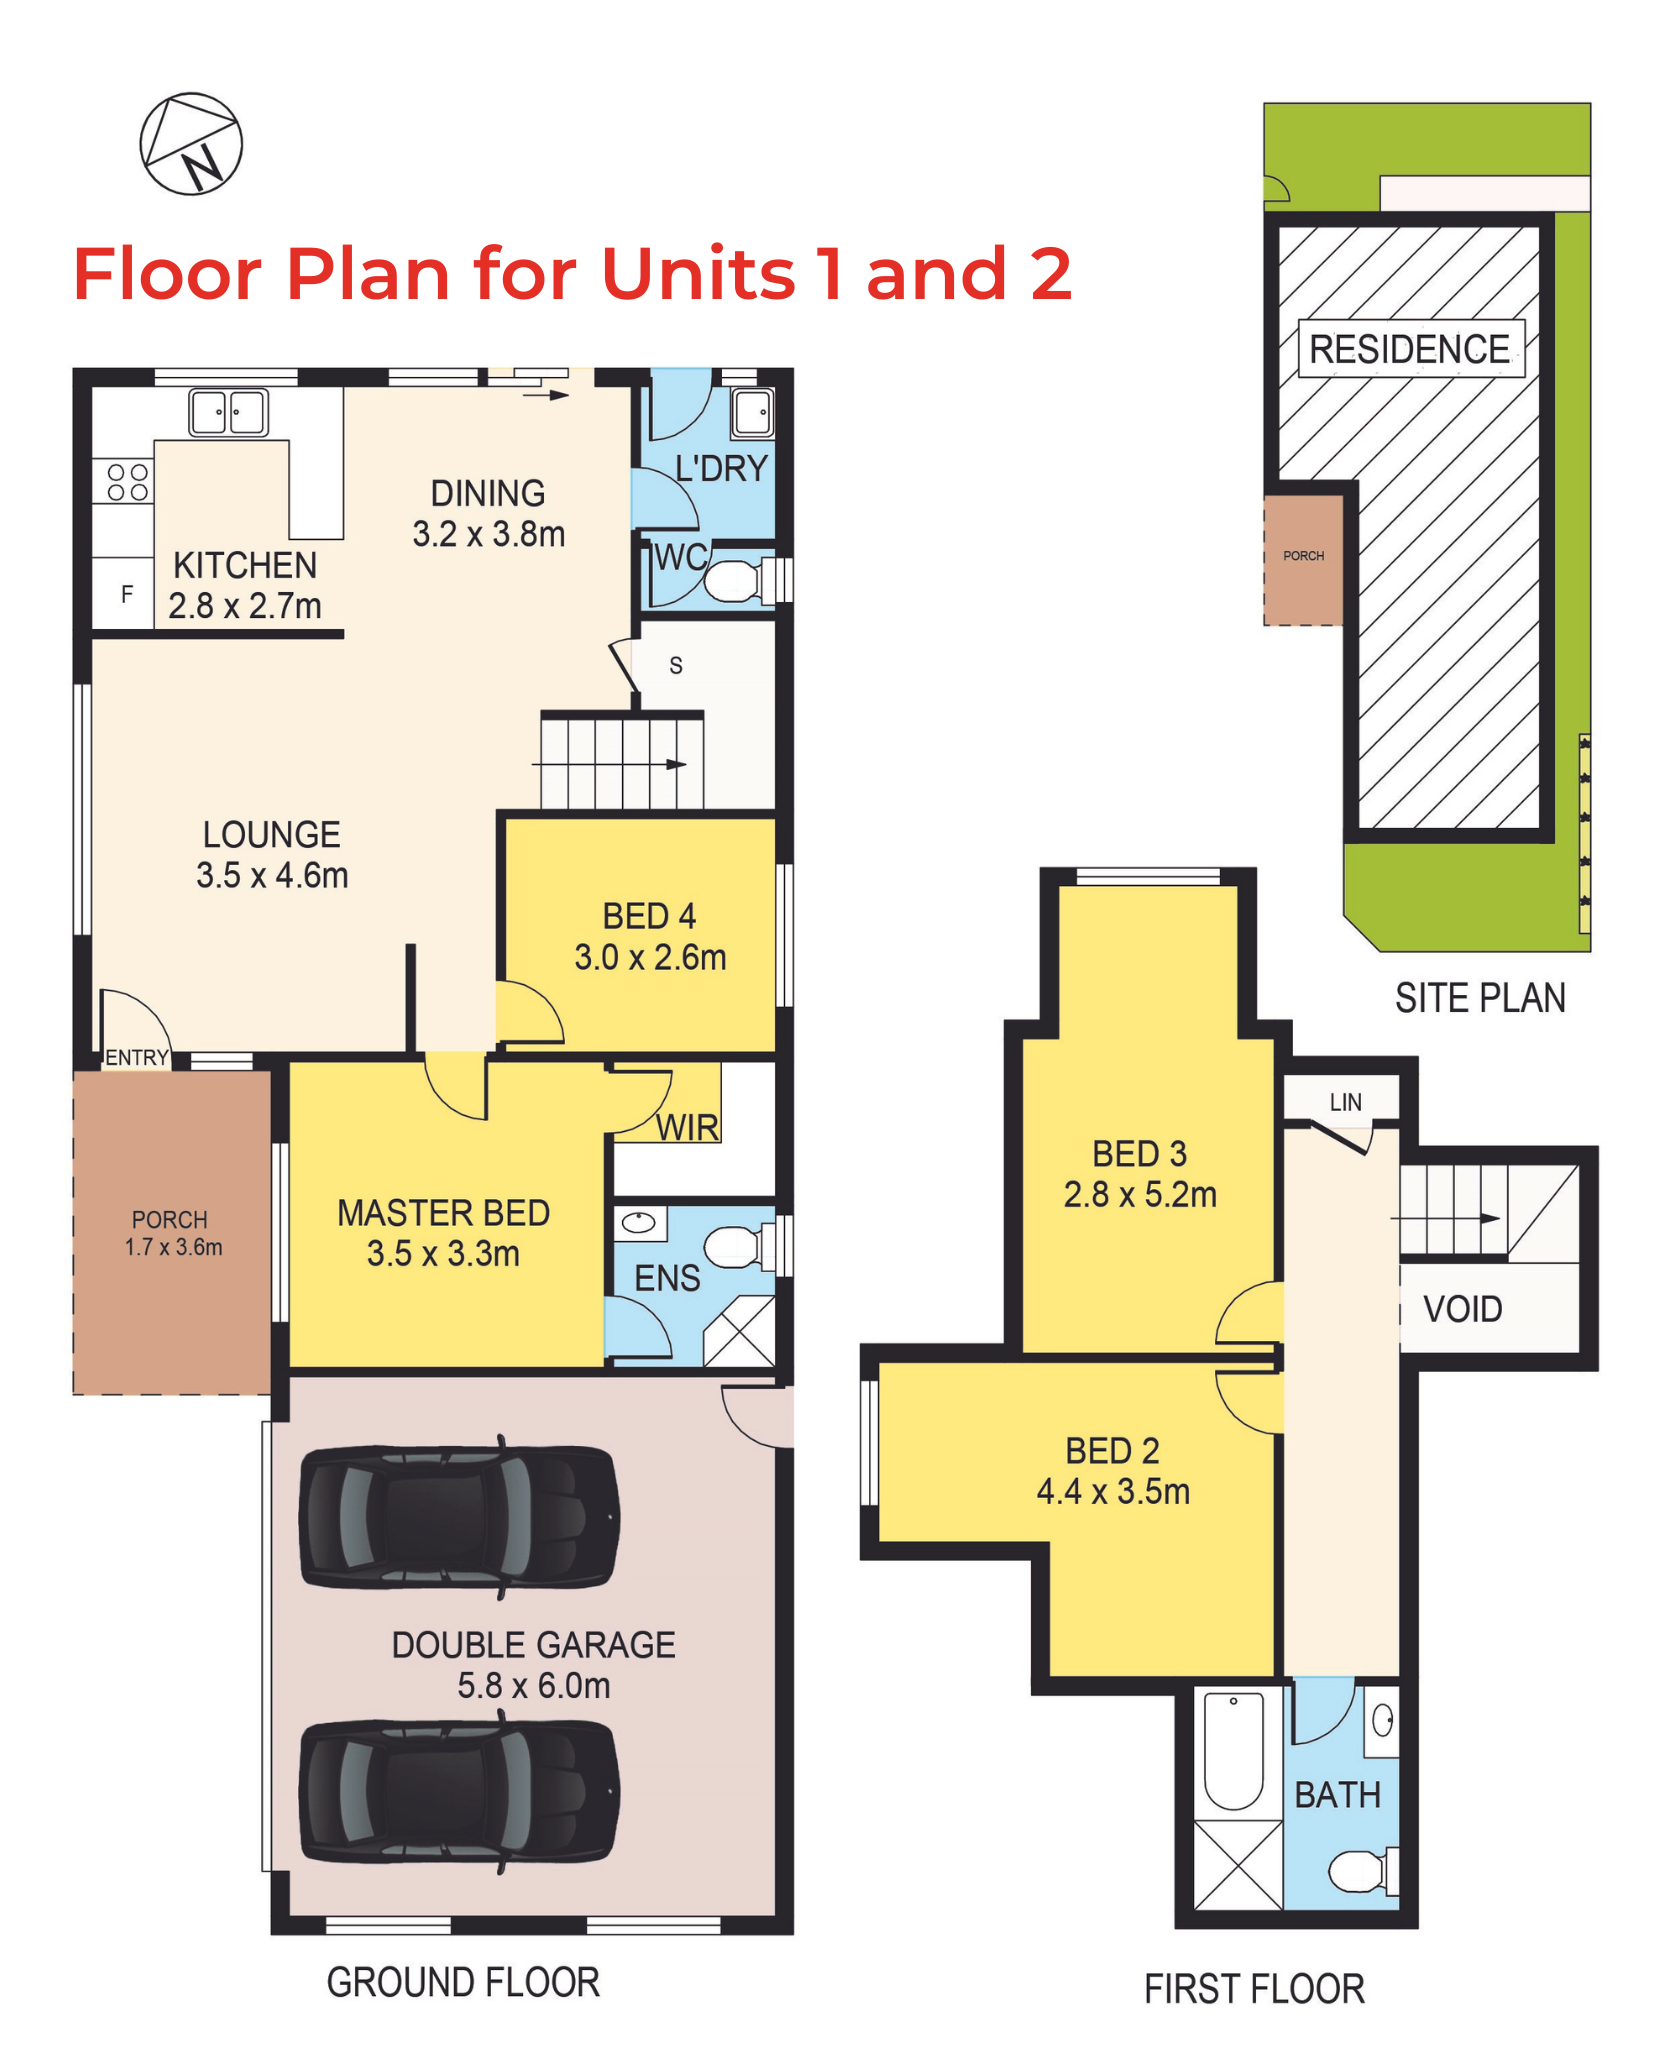 Floor Plan for Units 1 and 2